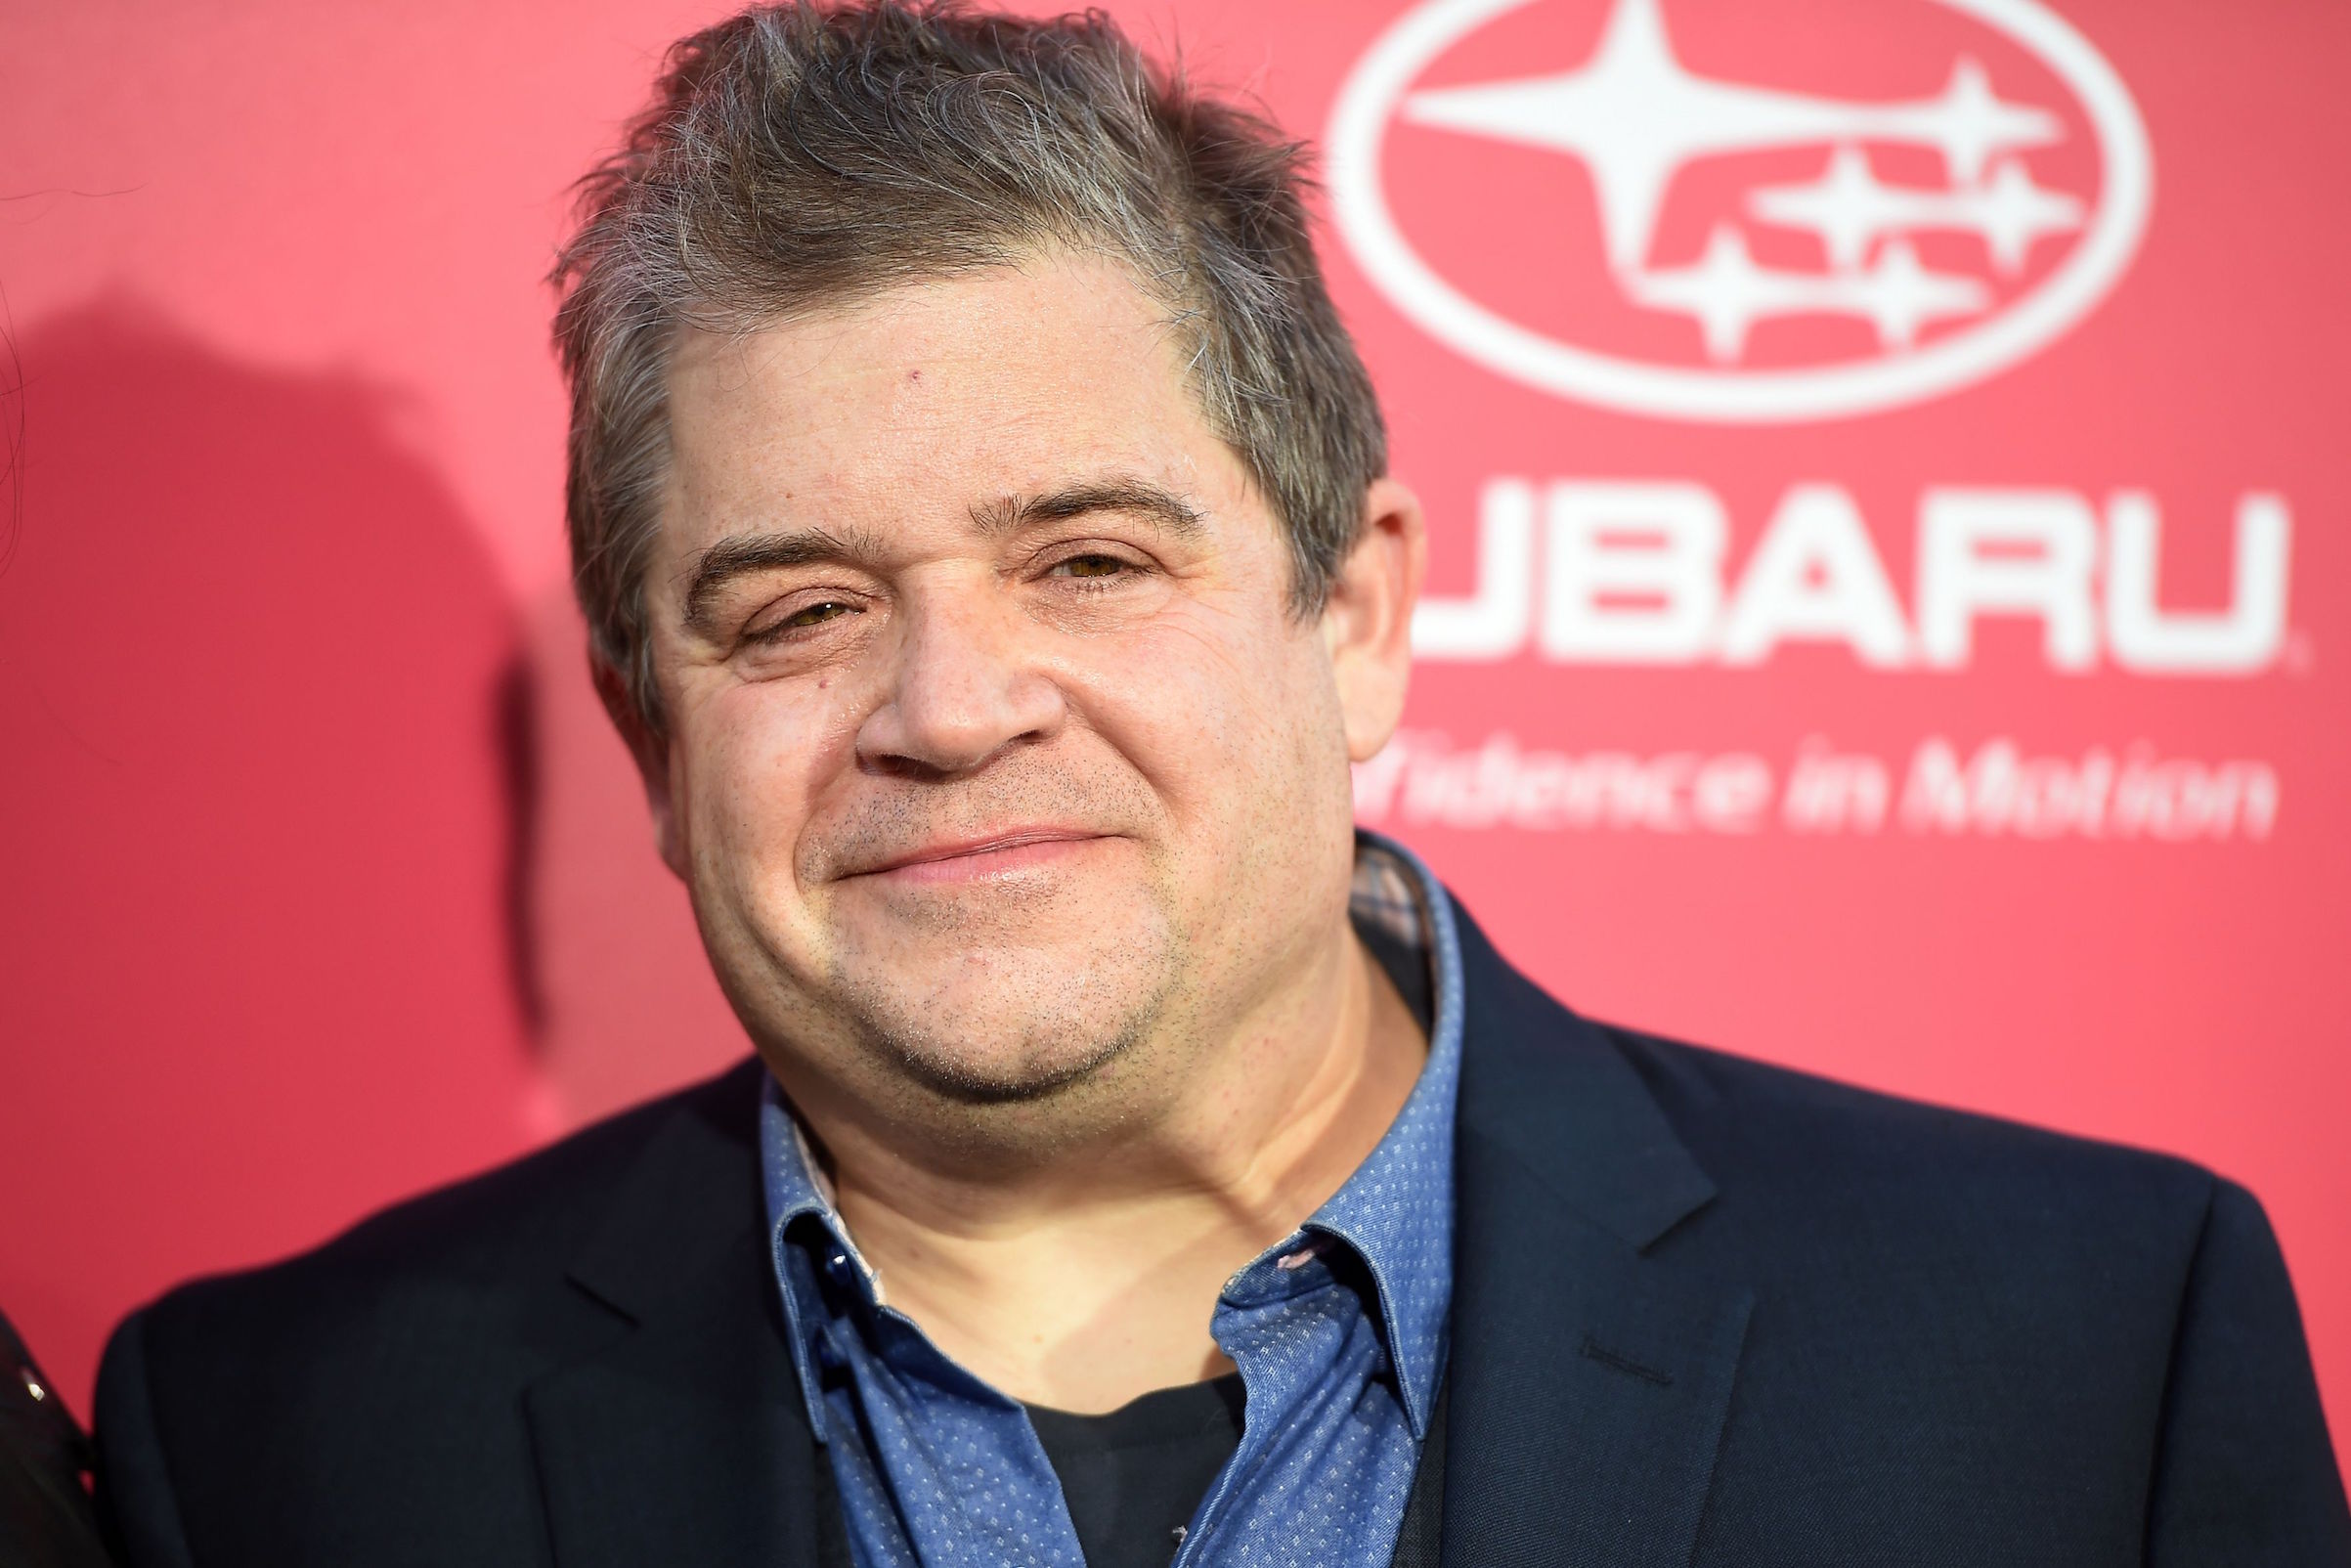 Patton Oswalt attends the premiere of "Baby Driver" in Los Angeles, California, on June 14, 2017. (Robyn Beck&mdash;AFP/Getty Images)